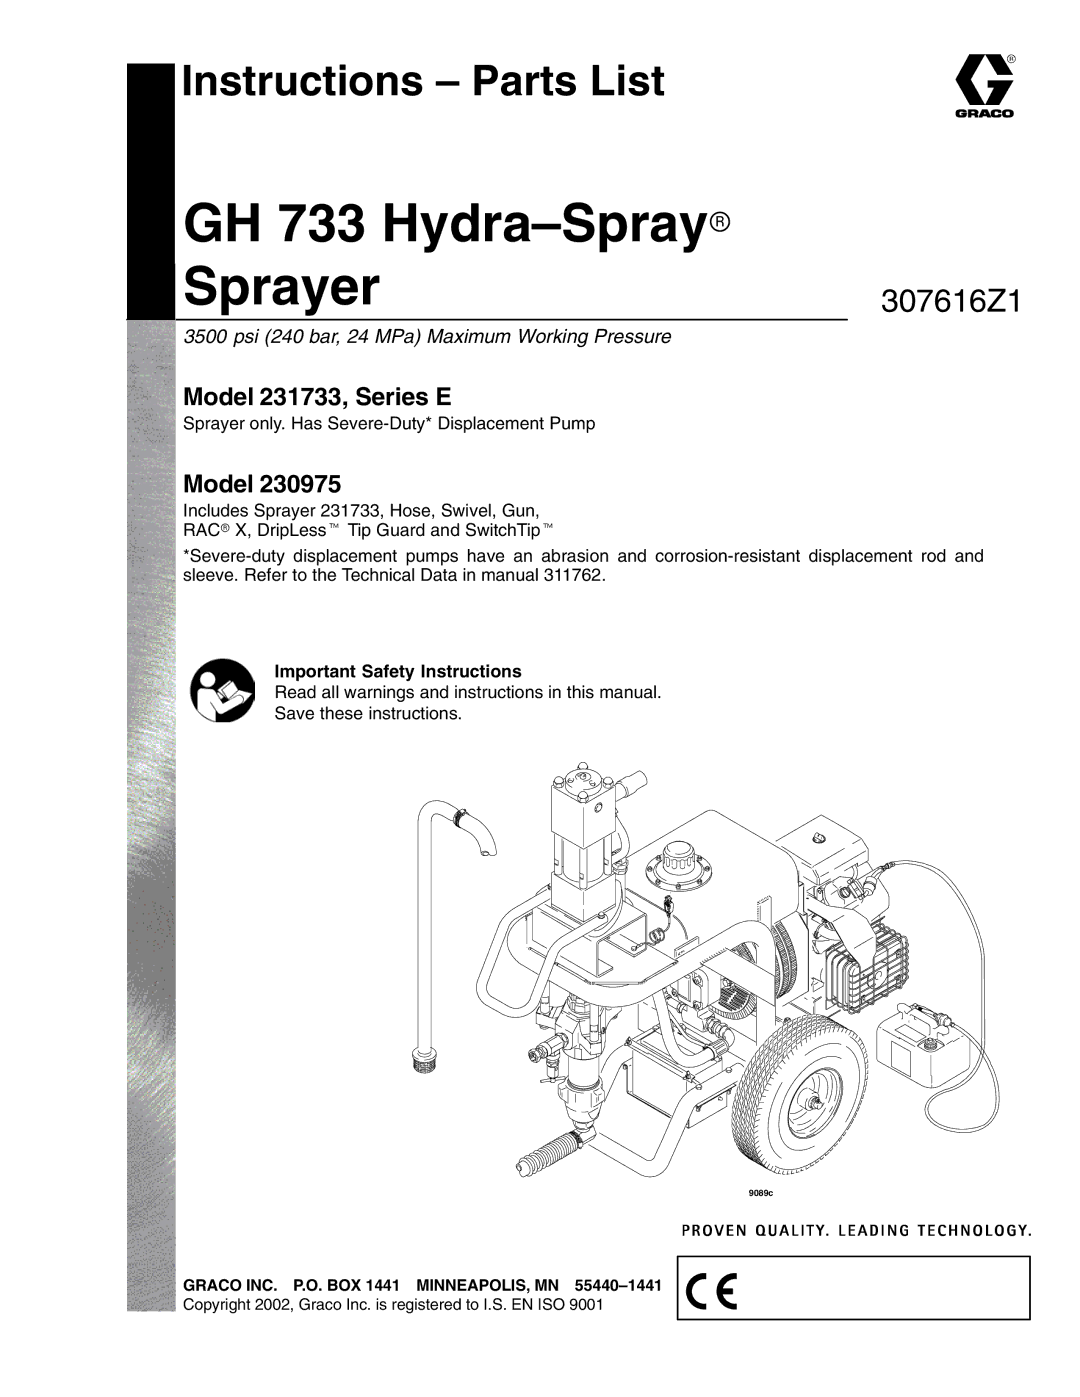 Graco Inc 231733, 230975, GH 733 important safety instructions Instructions Parts List, Important Safety Instructions 